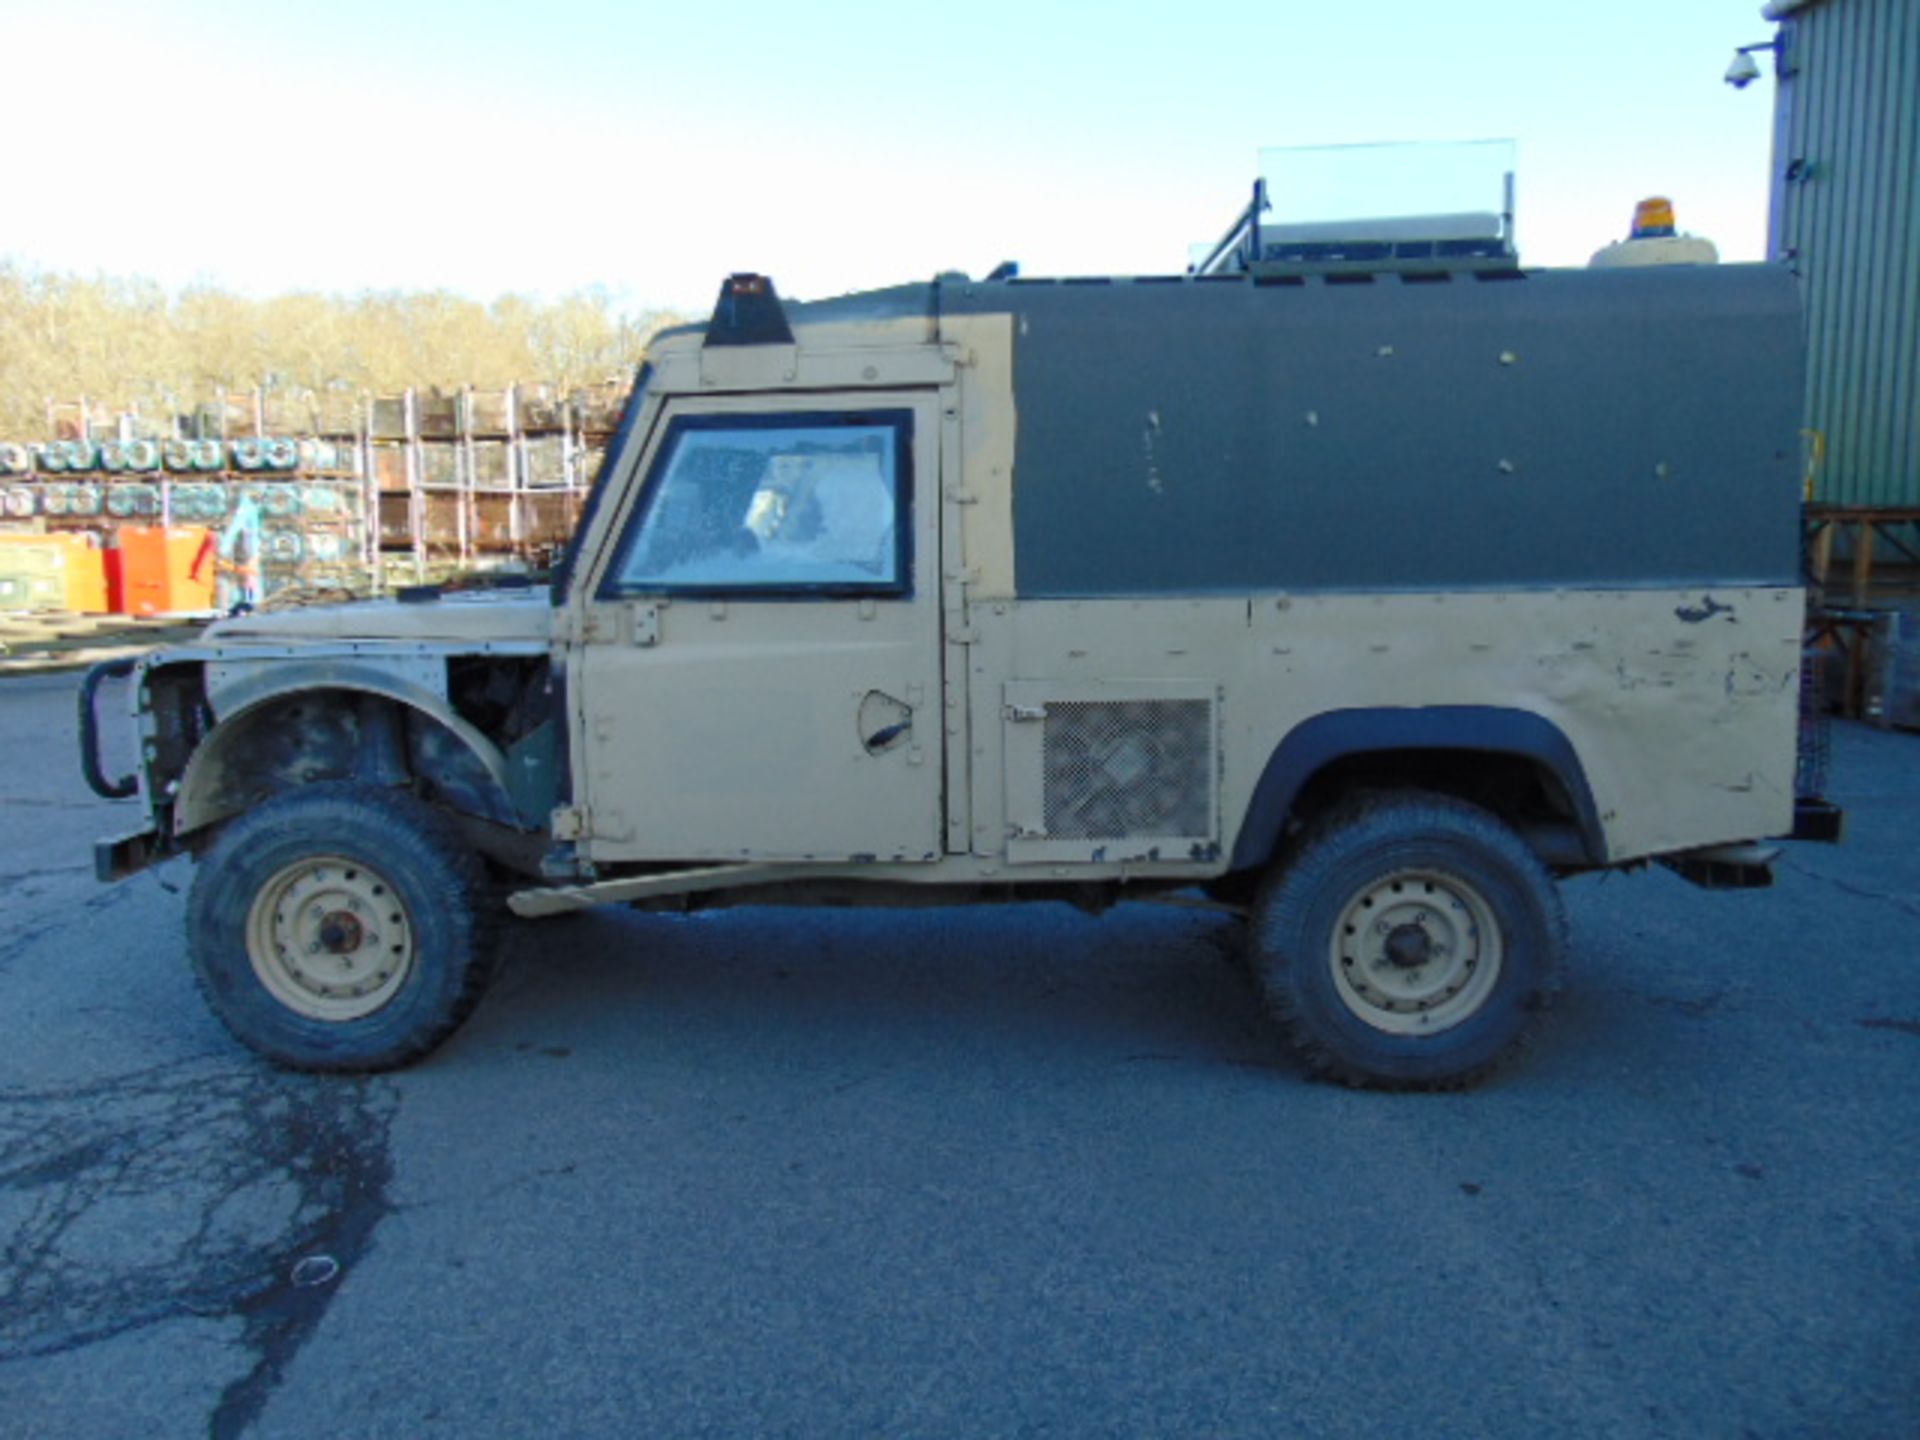 Very Rare Direct from Service Unmanned Landrover 110 300TDi Panama Snatch-2A - Image 4 of 14